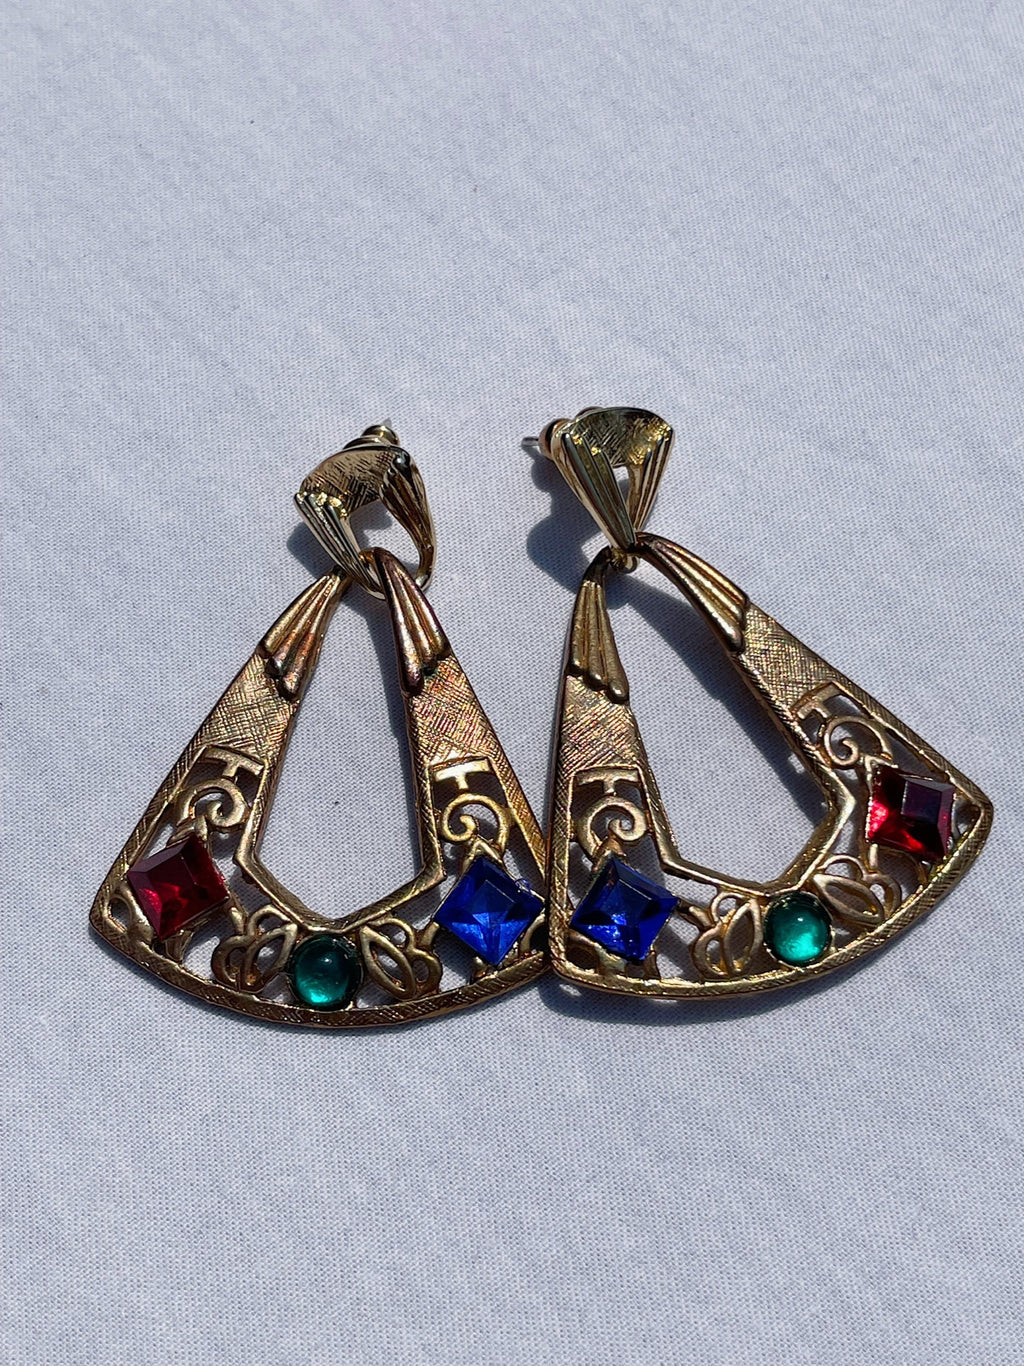 Vintage Gold & Colored Stone Earrings